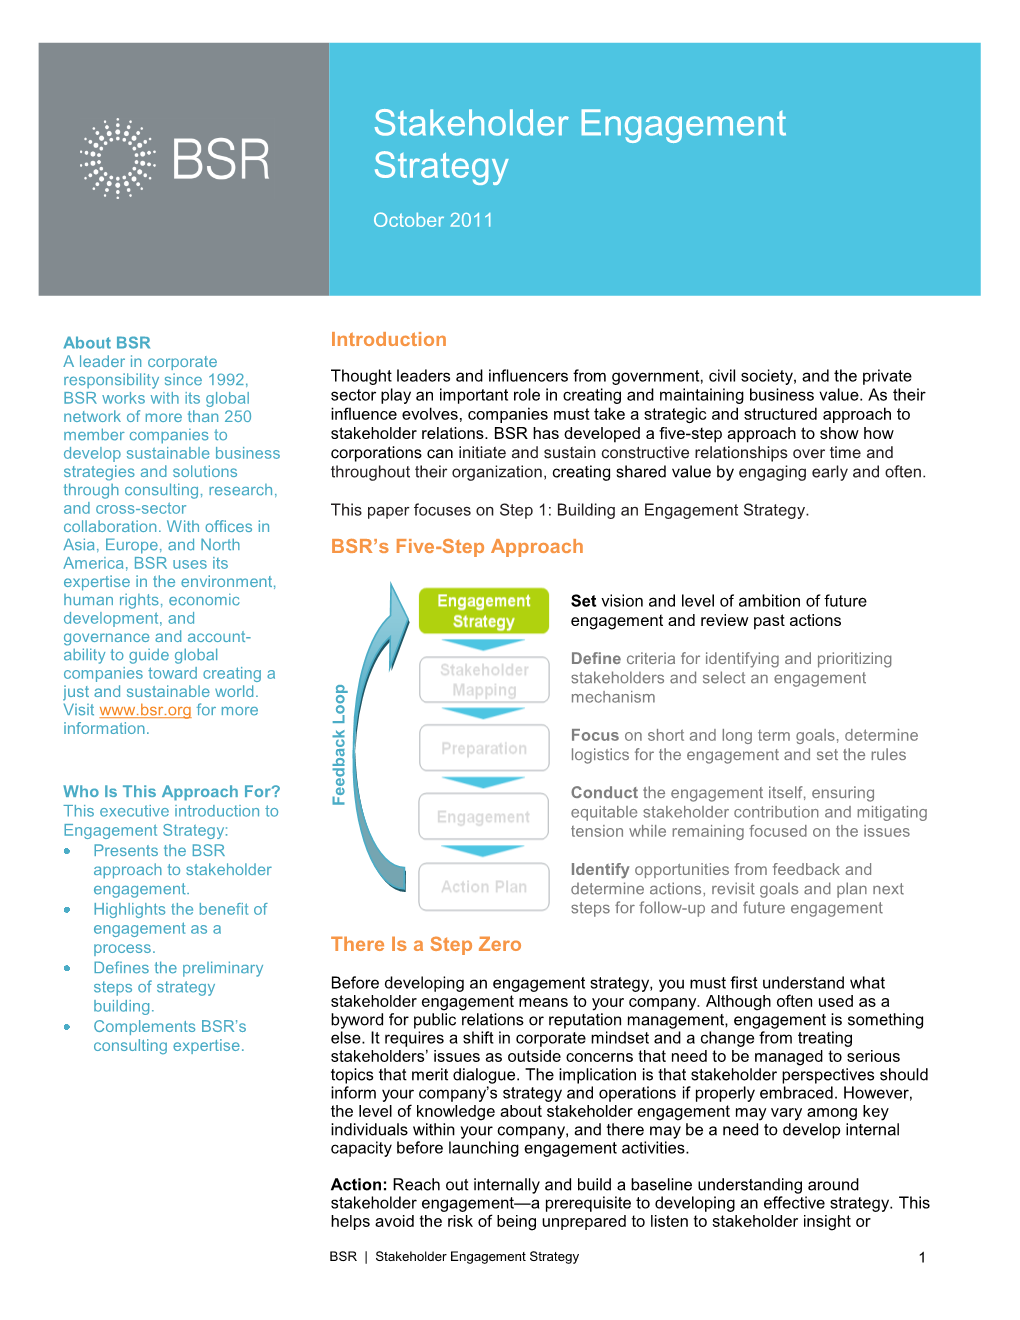 Stakeholder Engagement Strategy